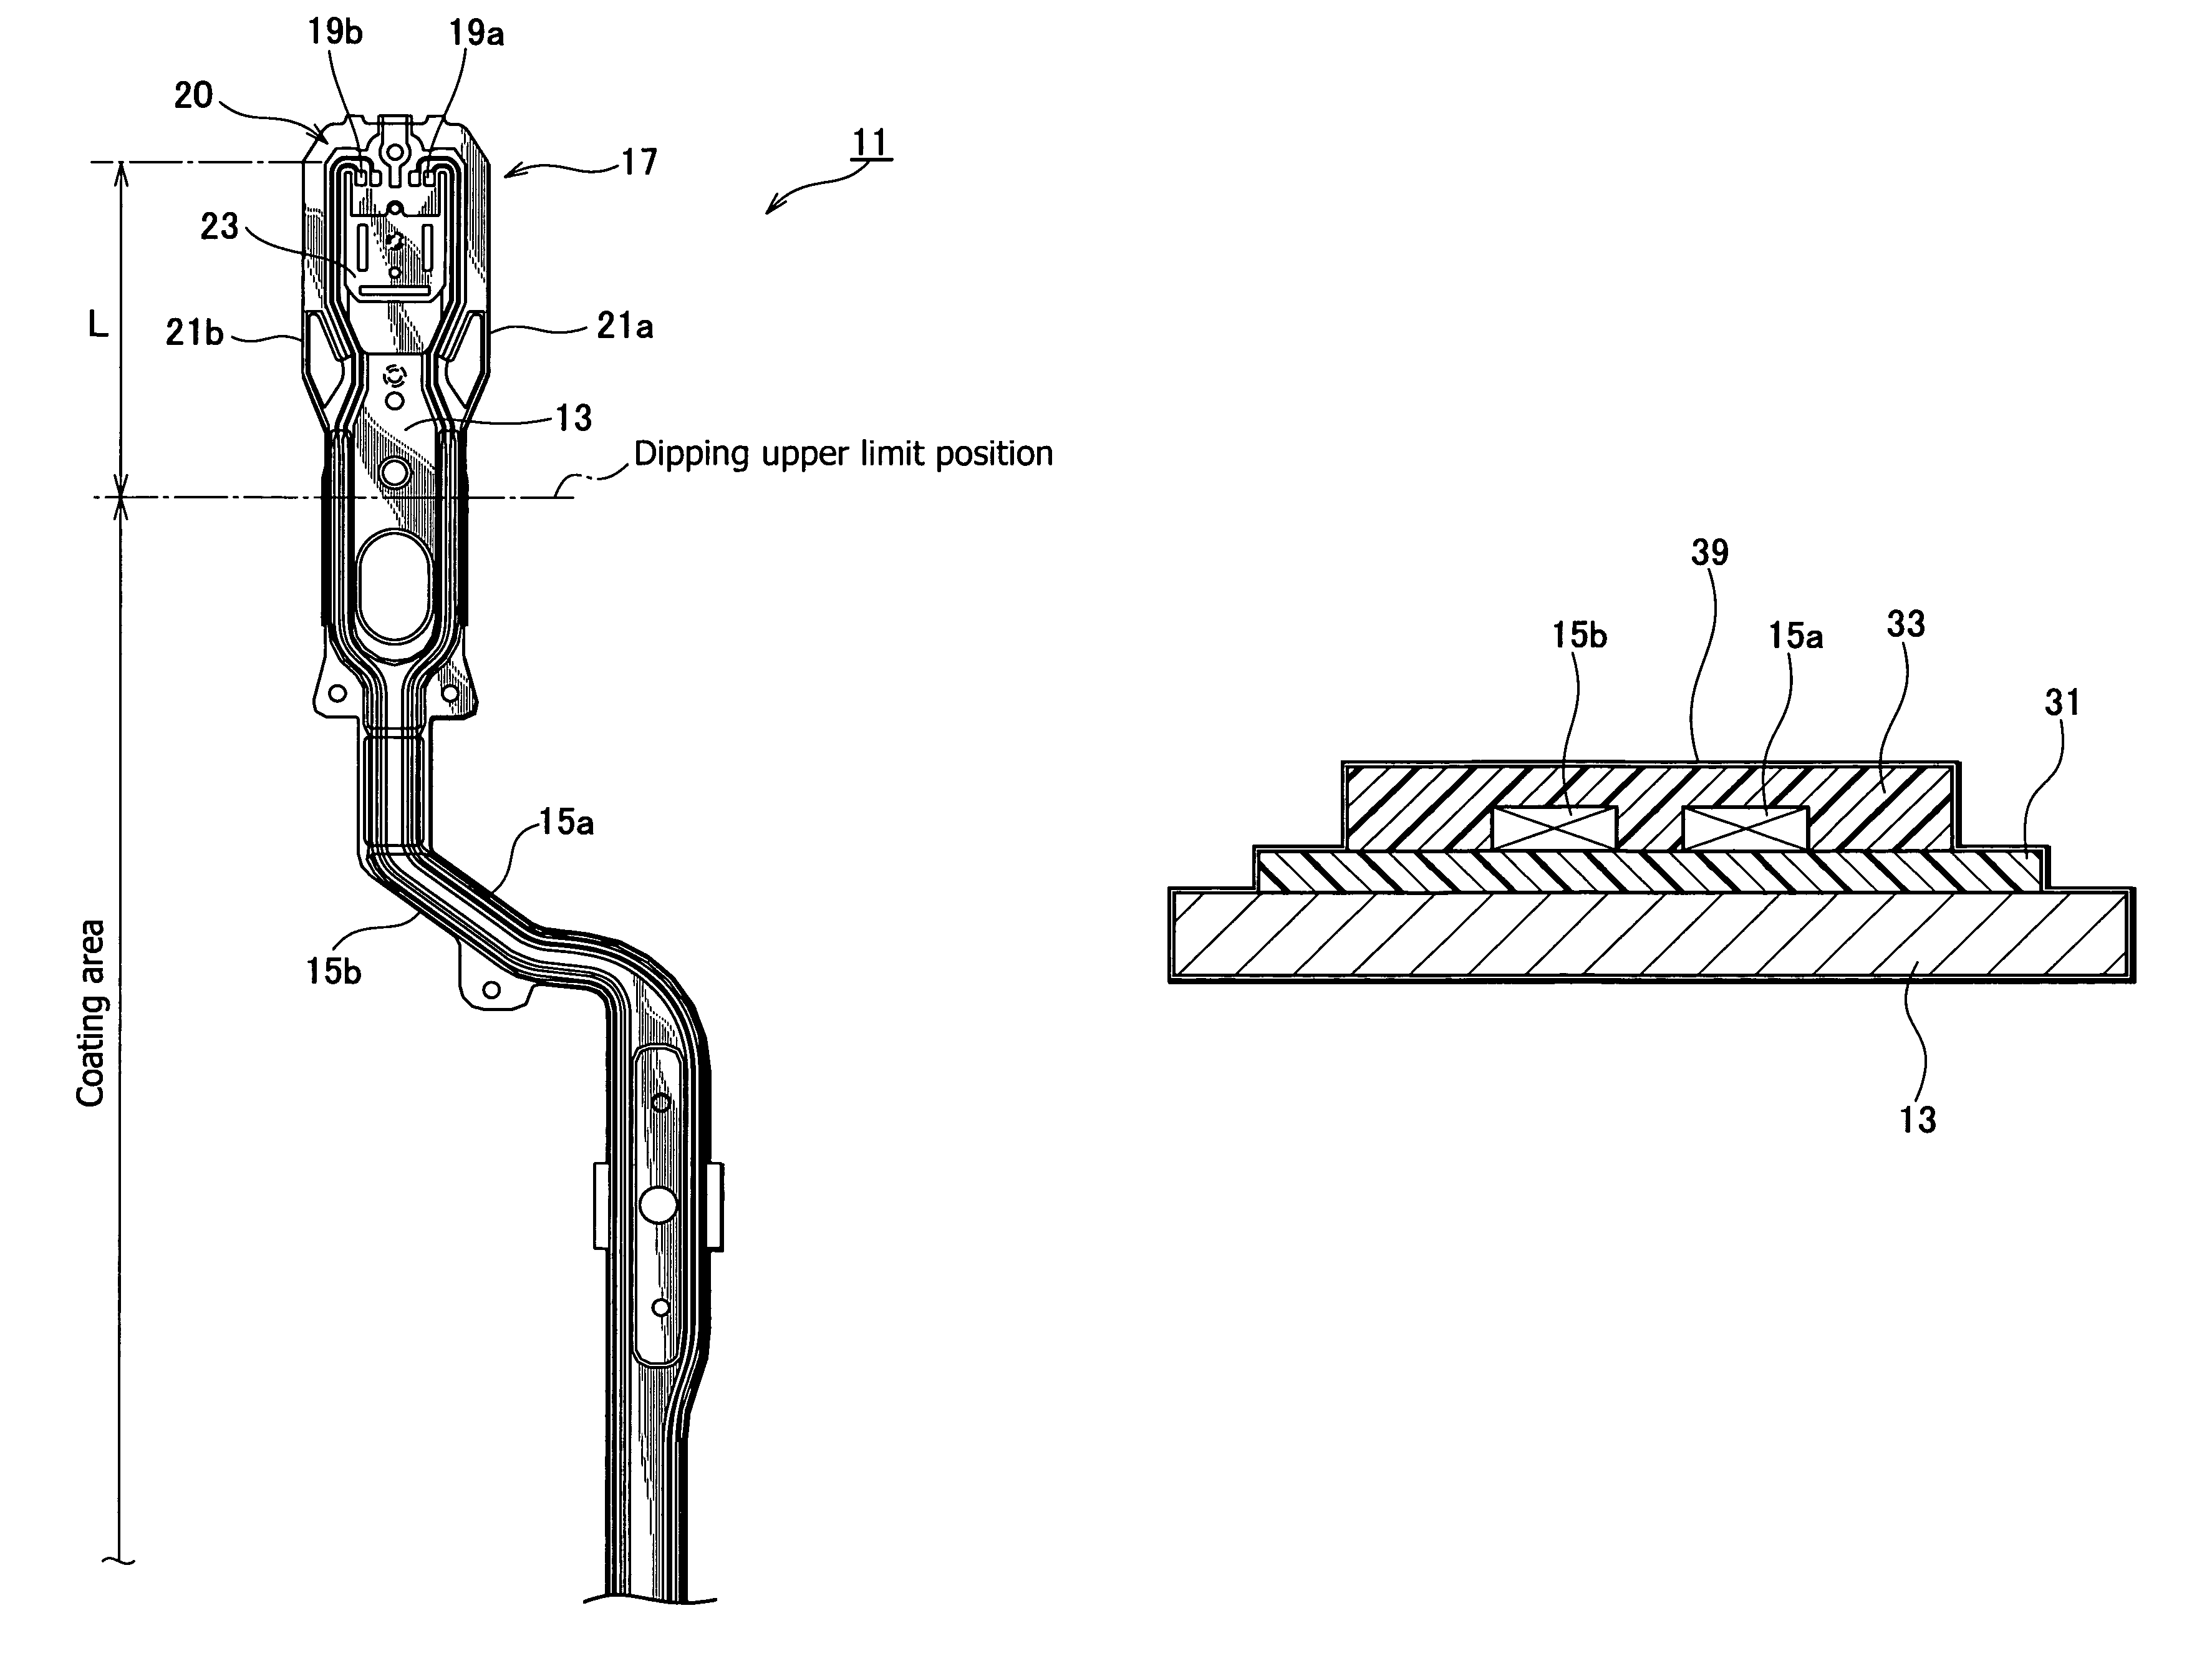 Head suspension flexure with conductive polymer layer